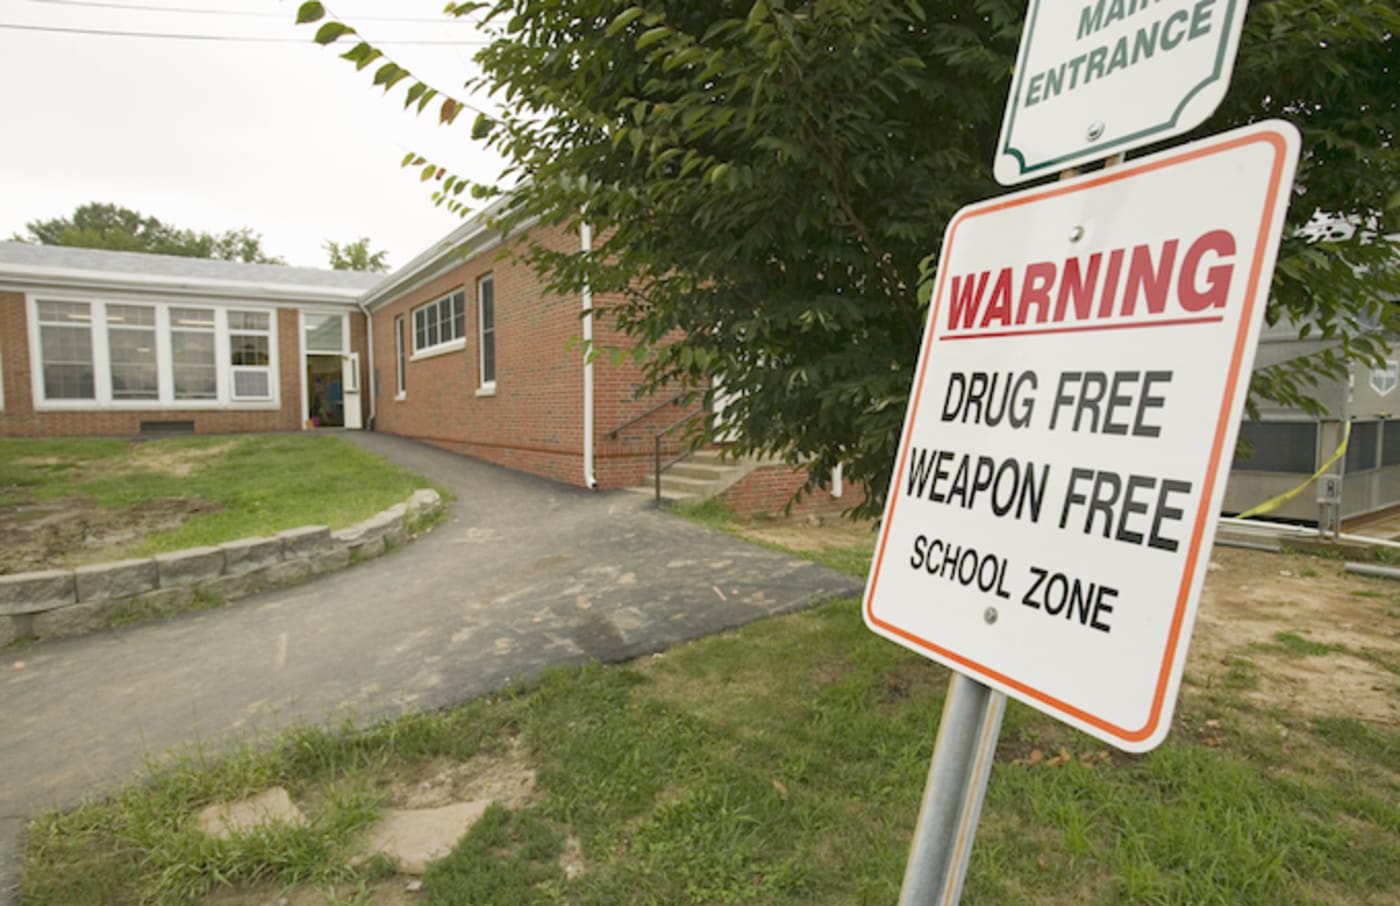 Drug Free and Weapon Free School Zone sign